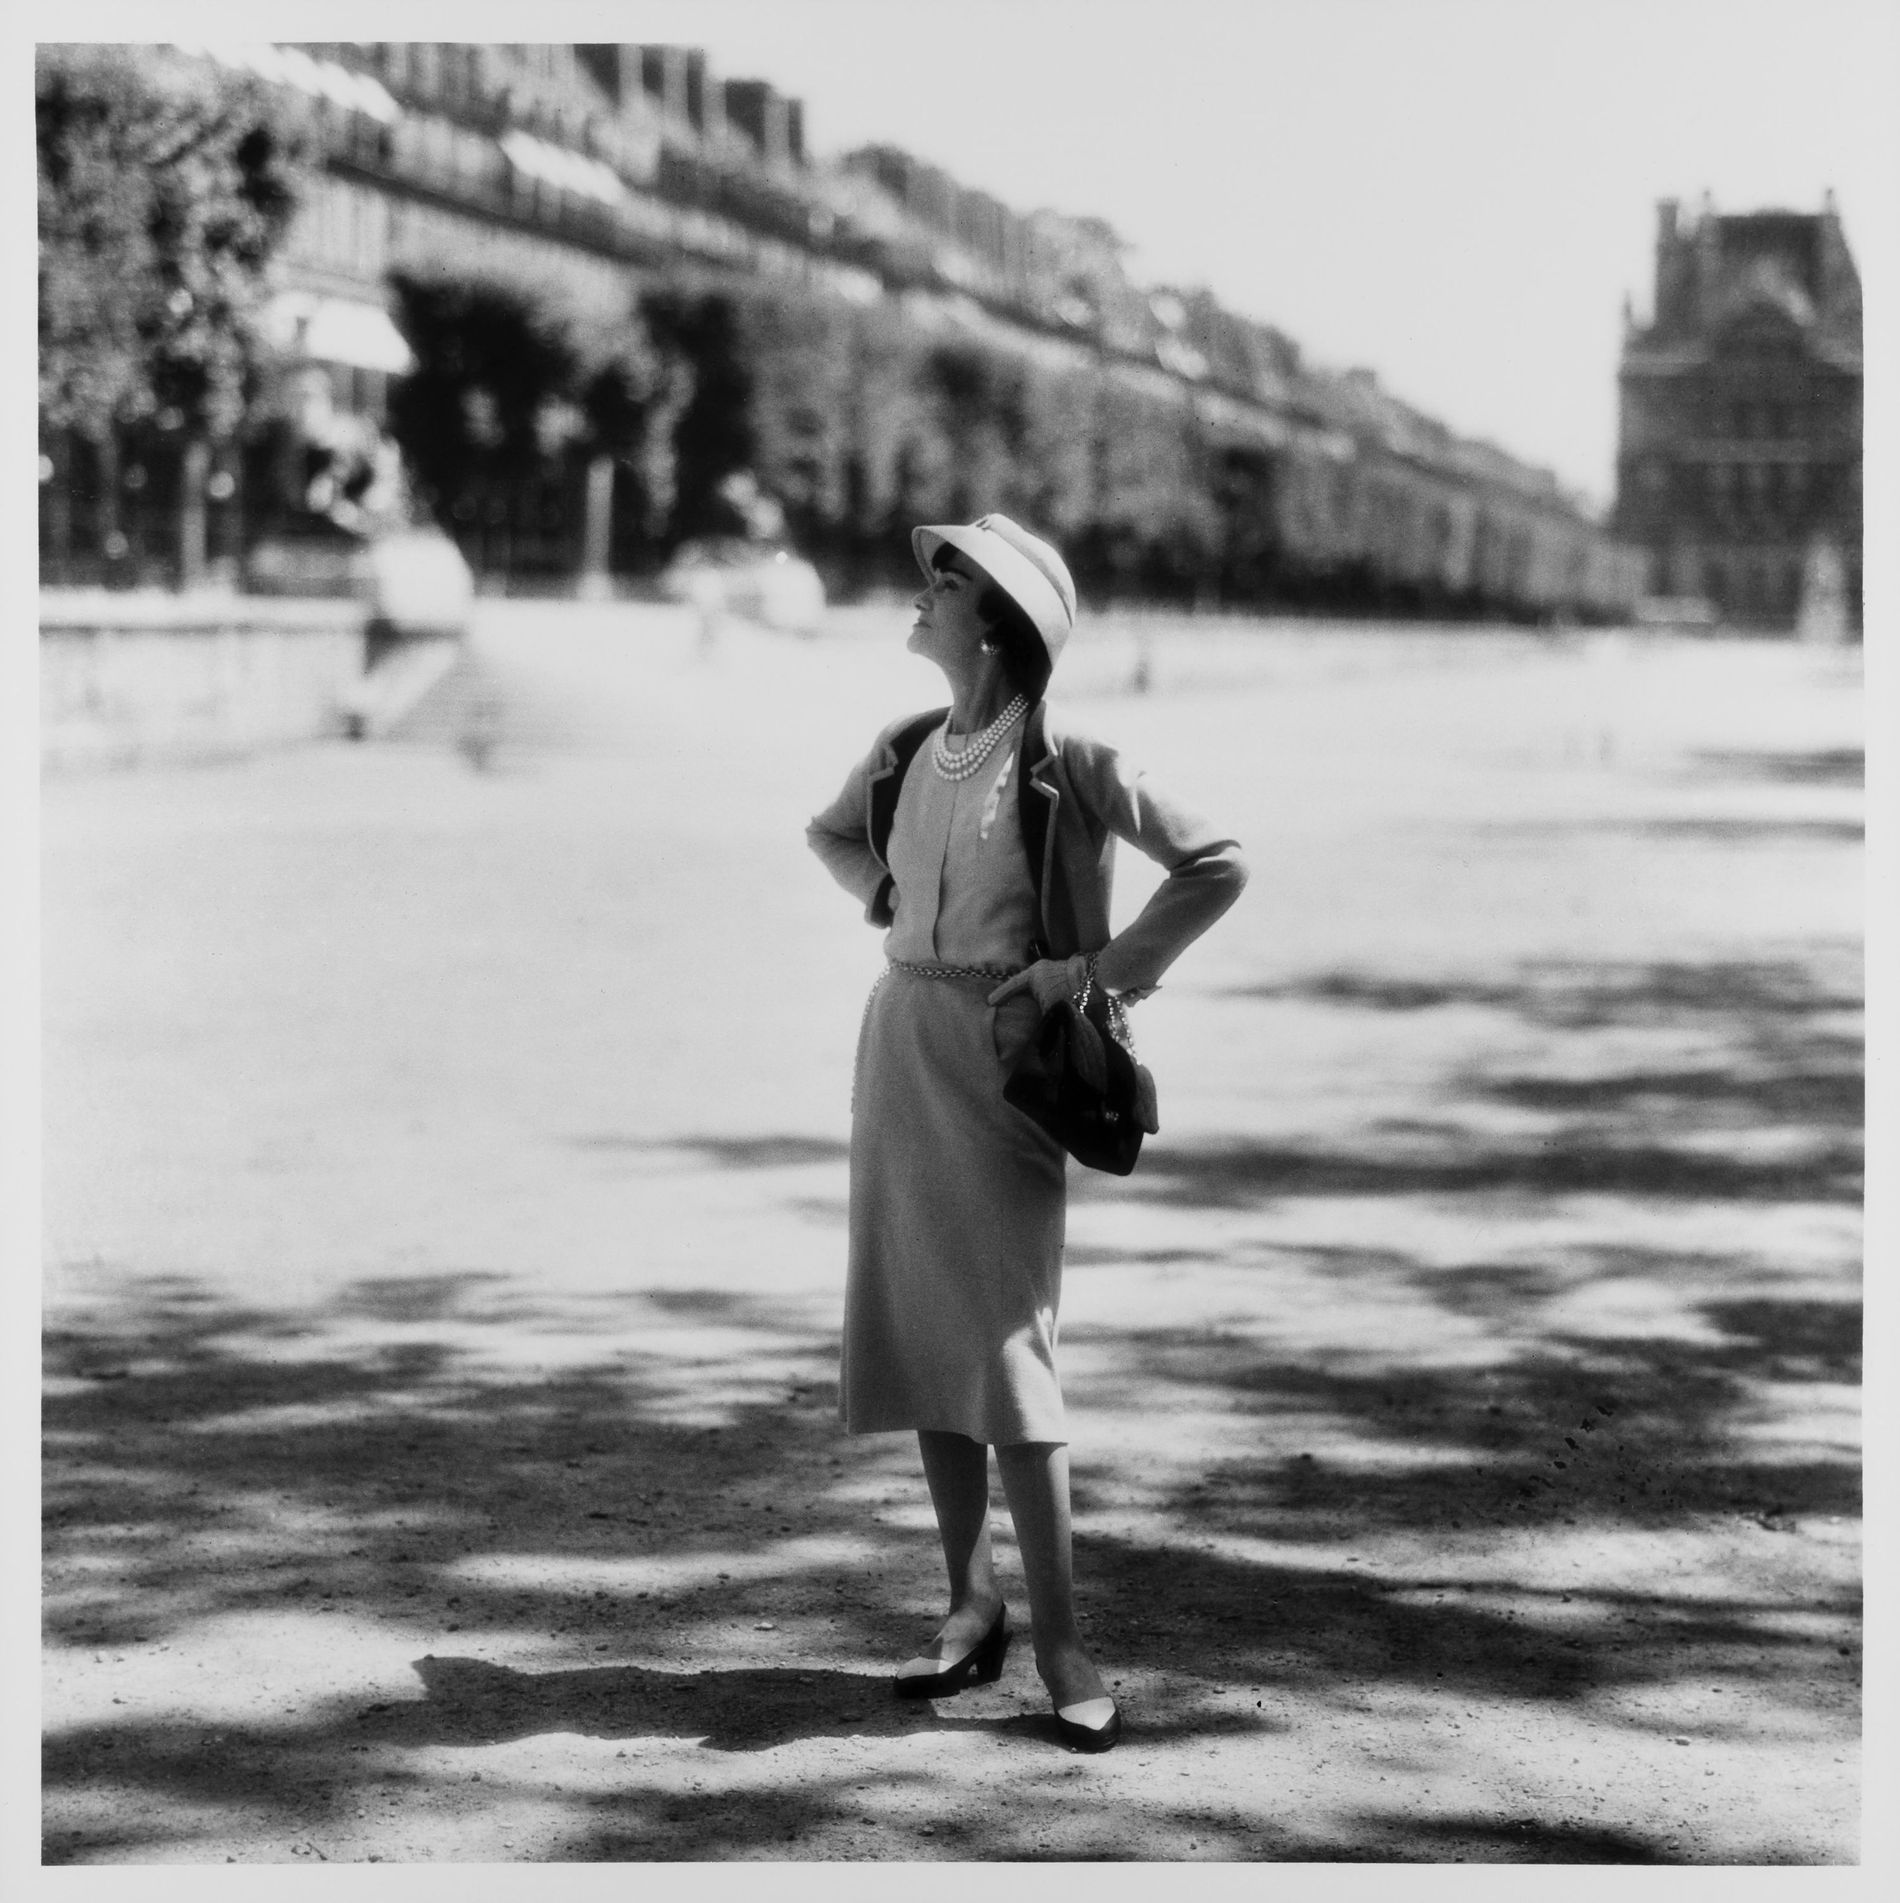 Mademoiselle Chanel at the Jardin des Tuileries. Paris - 1960 by Willy Rizzo